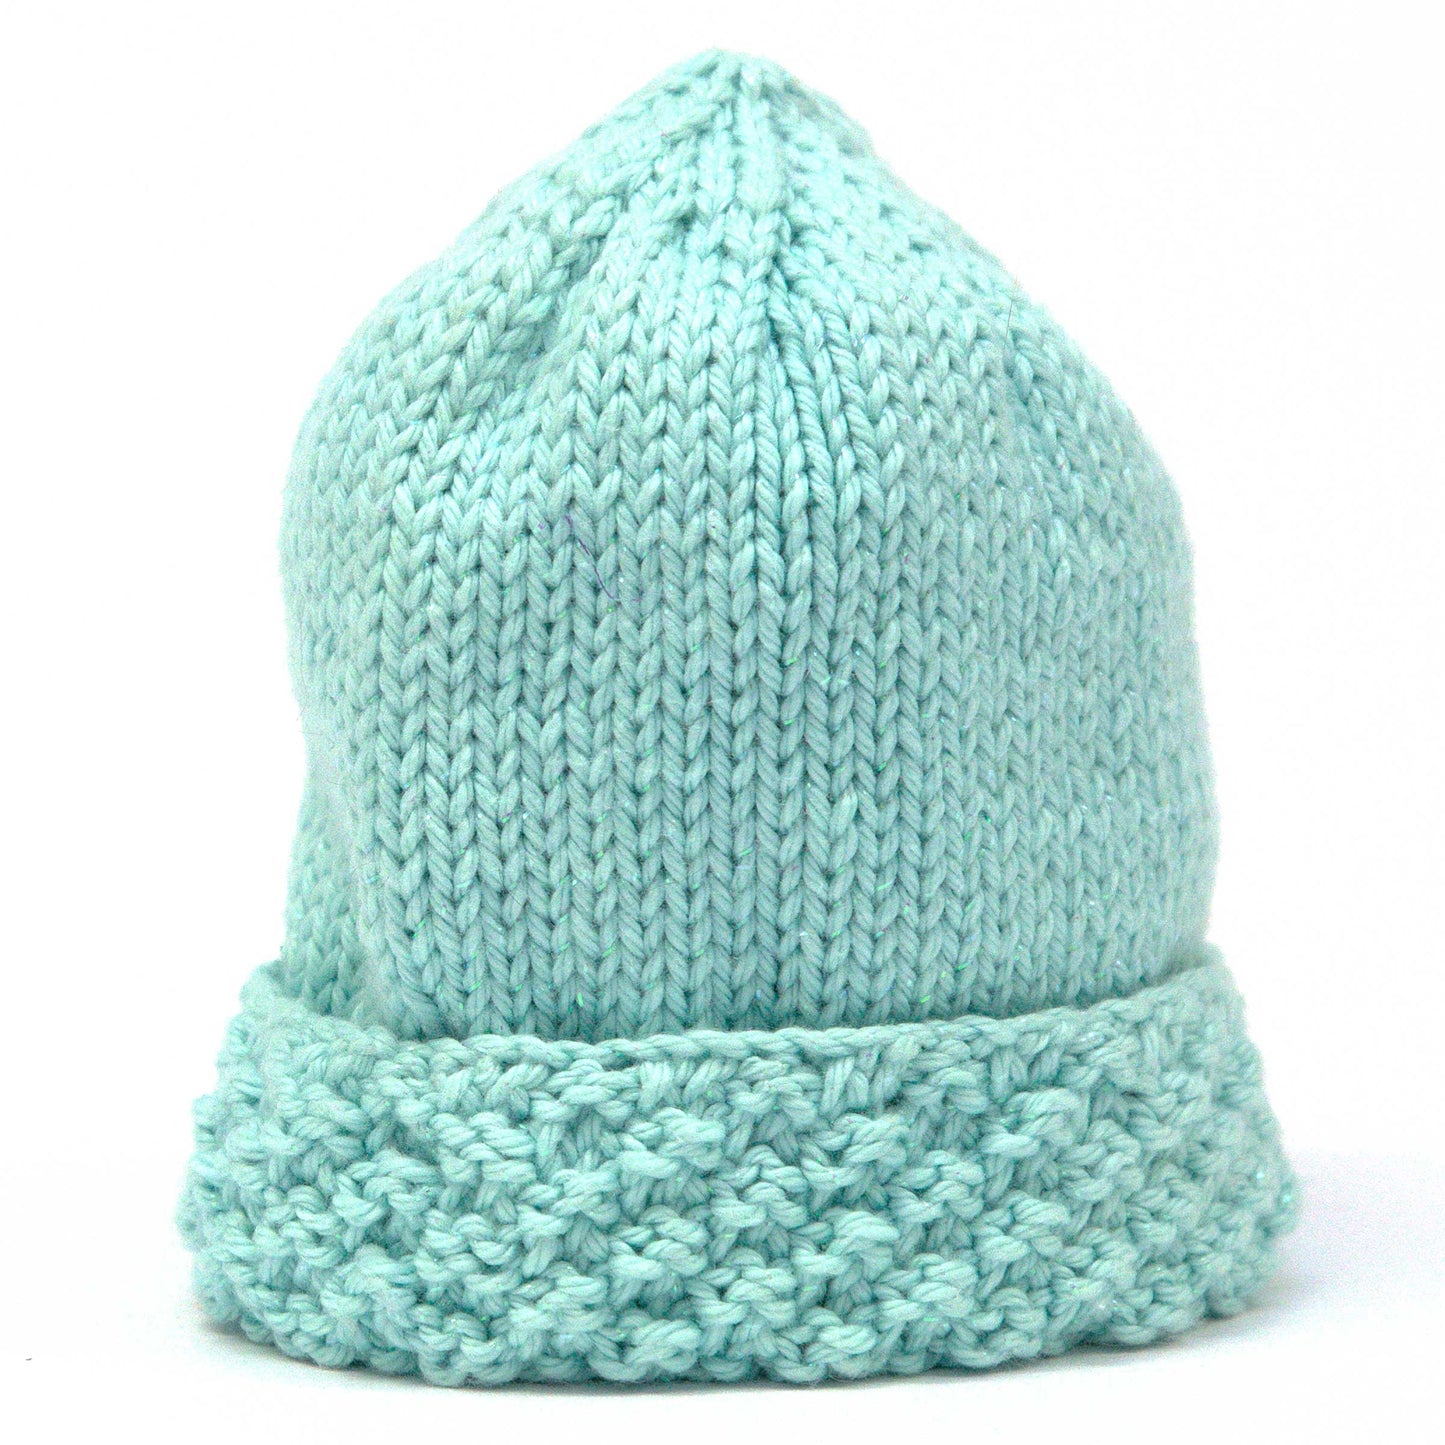 Knitted Baby Hat, Hand Knit, 100% Cotton, Washable, Teal, Teal Glitter